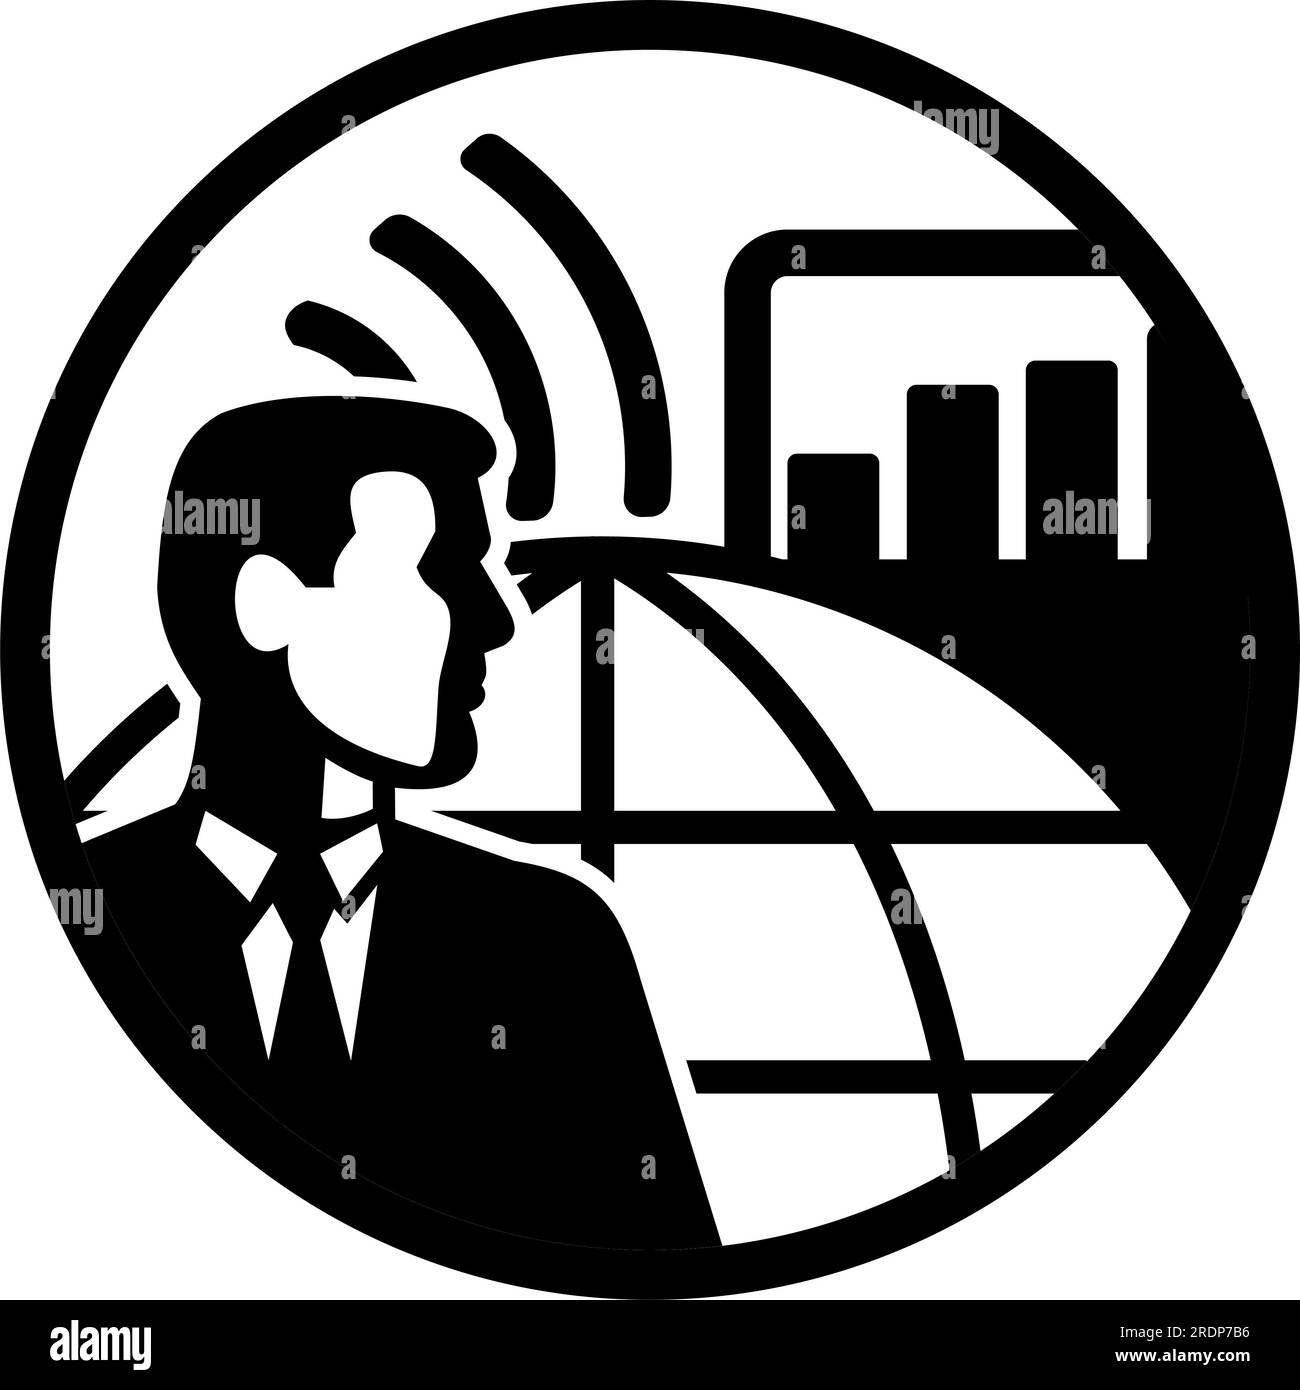 Retro style illustration of a businessman industrial engineer with internet connectivity, globe, sales graph, industrial buildings set inside circle o Stock Photo